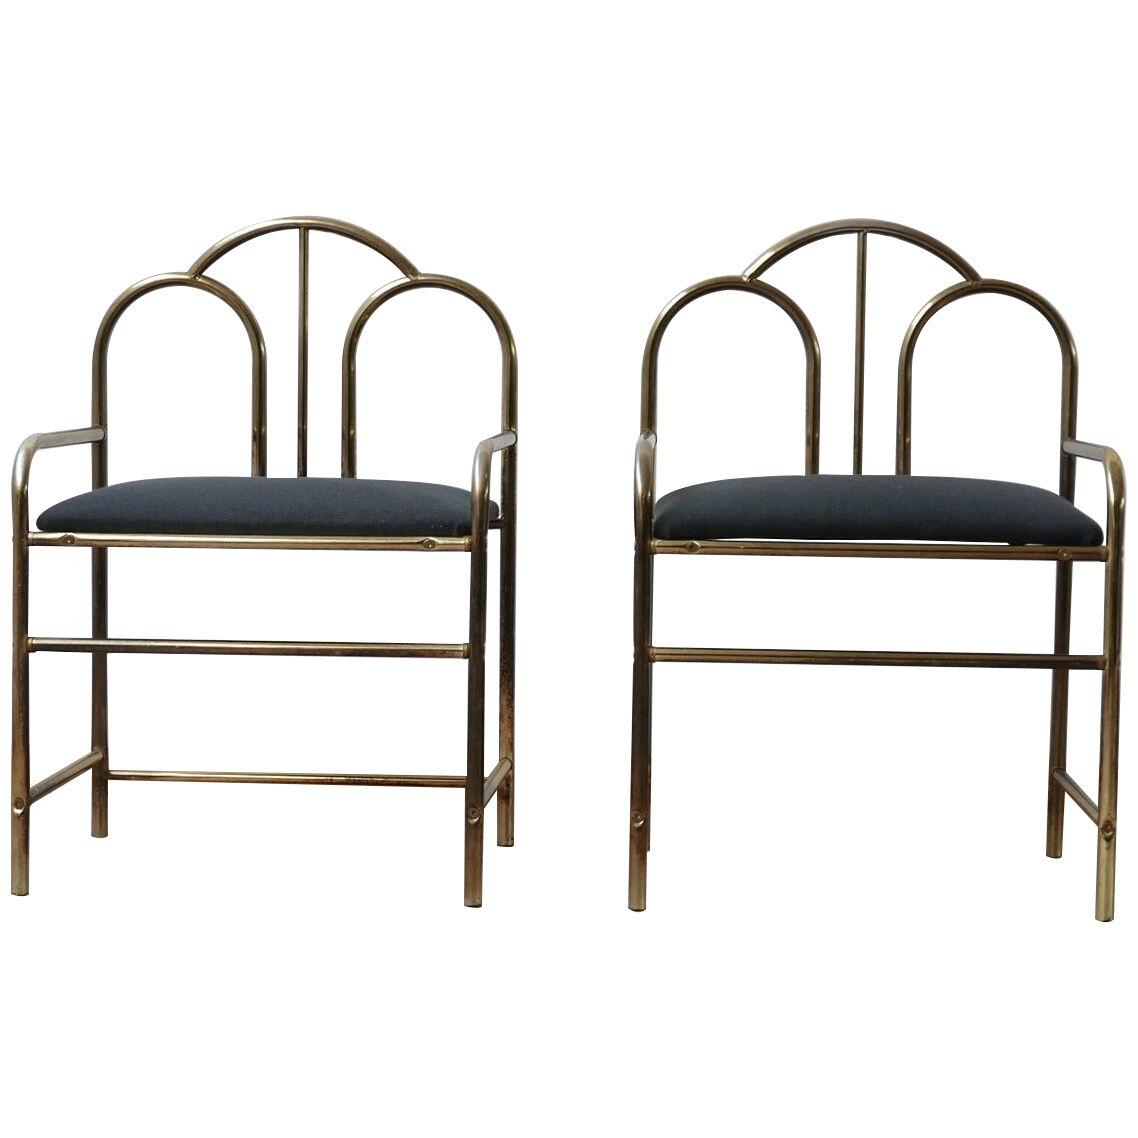 Pair of French Art Deco Style Occasional Chairs (2)